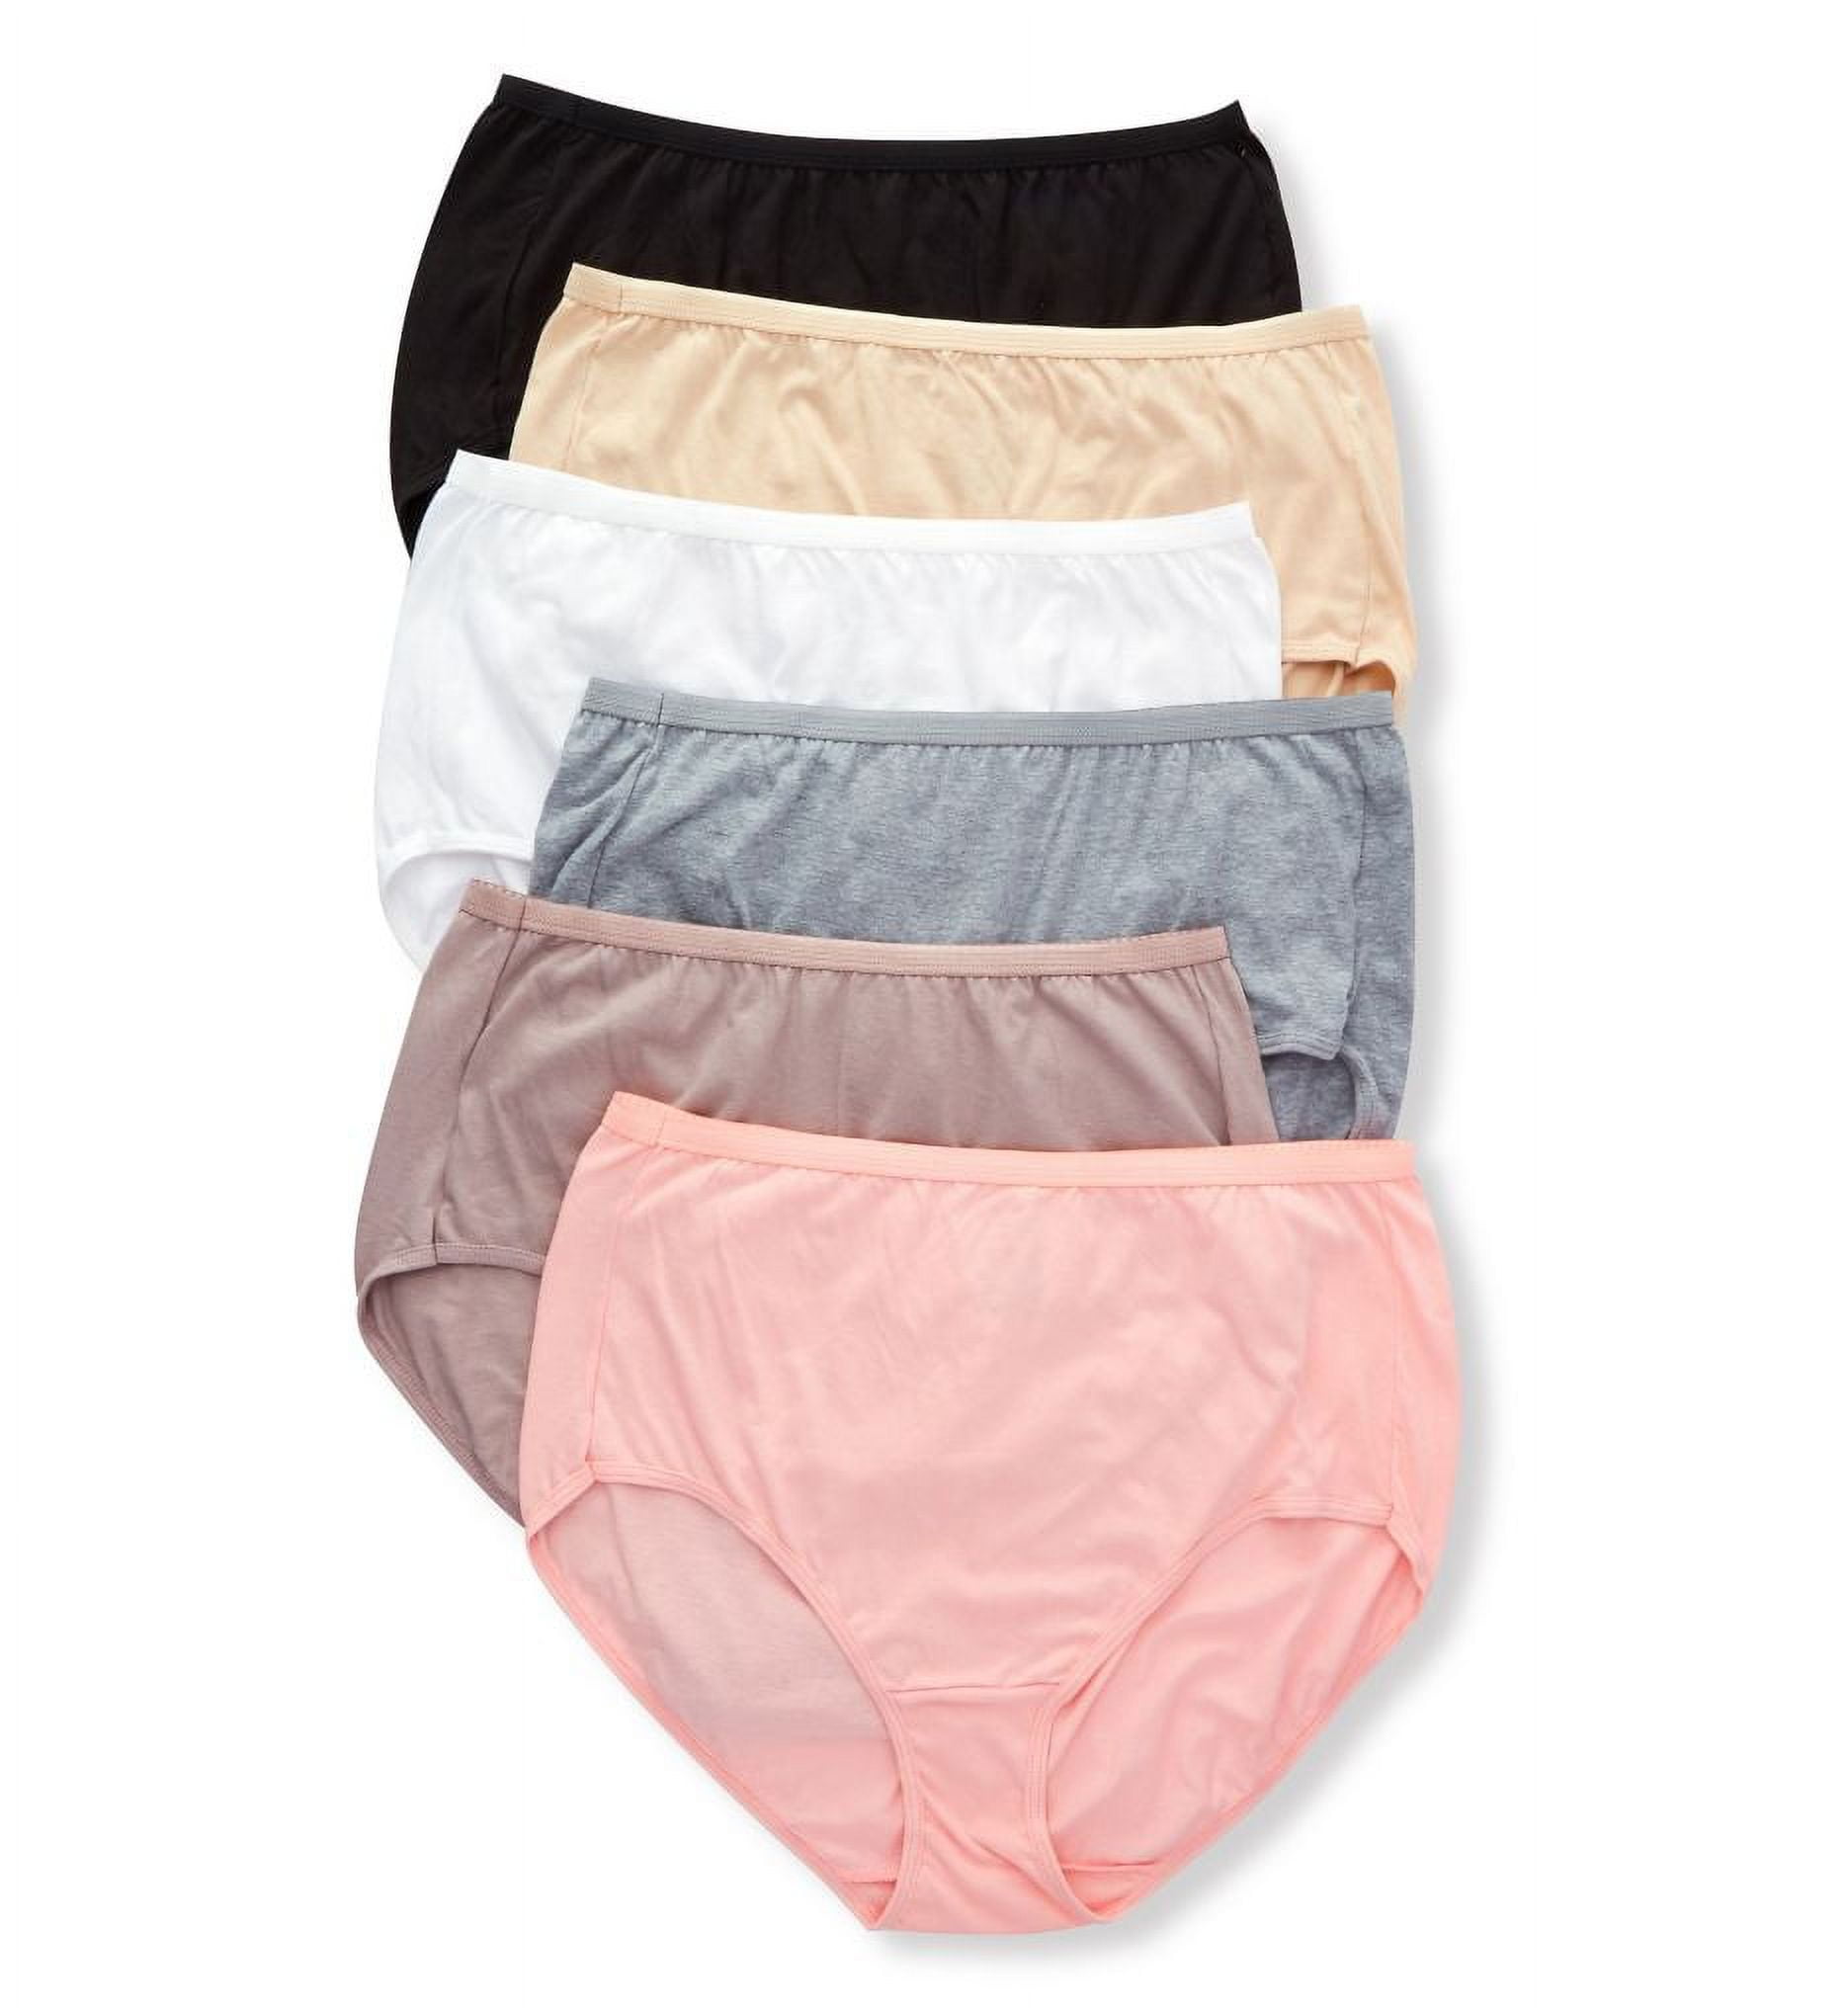 Women's Just My Size 16156C Cool Comfort Cotton High Brief Panty - 6 Pack  (Assorted 9)